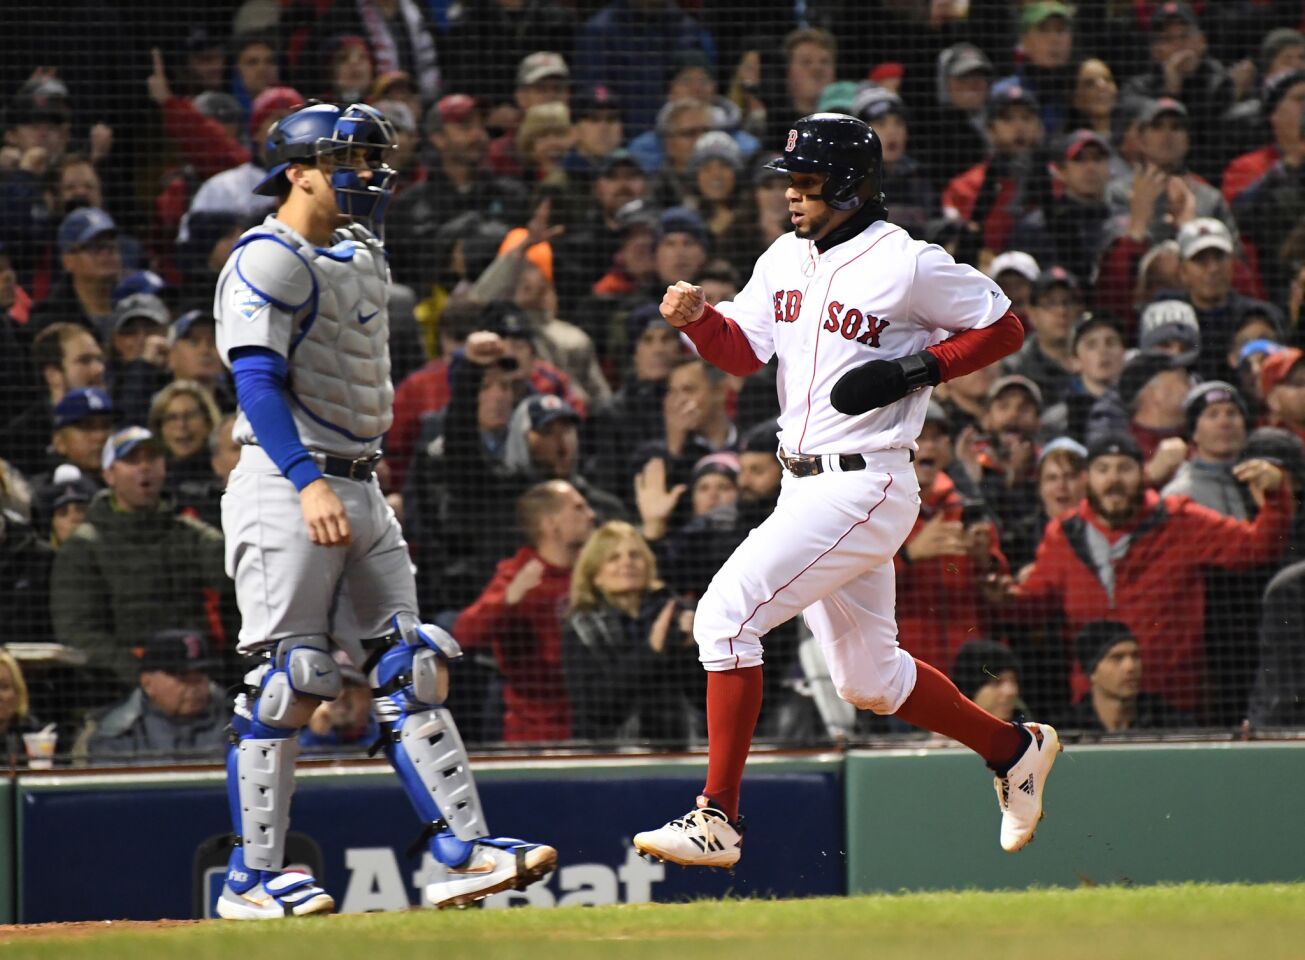 Red Sox's Xander Bogaerts scores on a single by Ian Kinsler in the first inning.